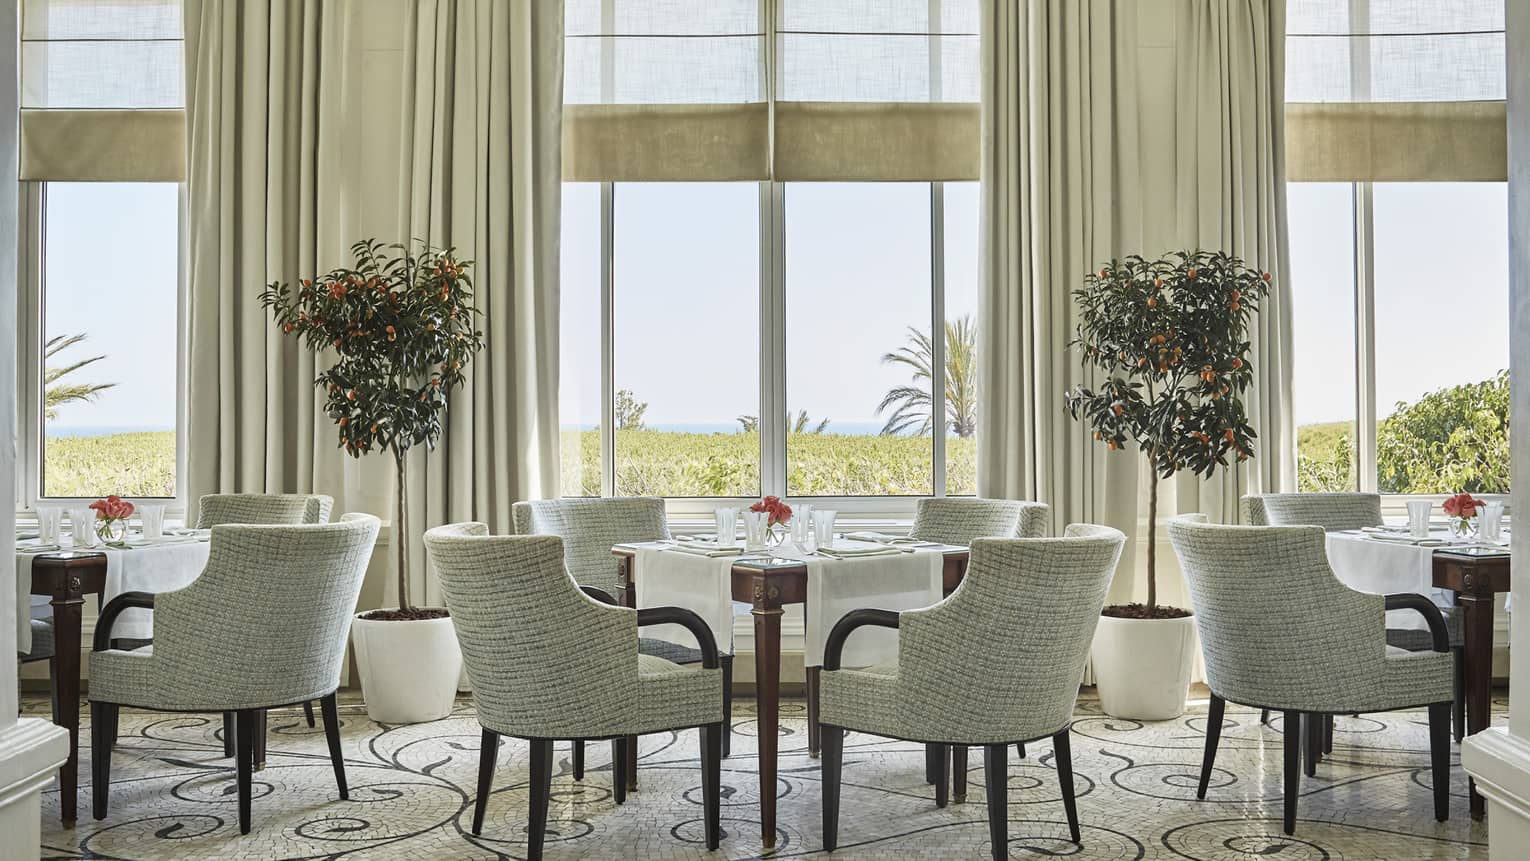 Dining chairs and tables under tall, sunny windows, potted trees in La Veranda